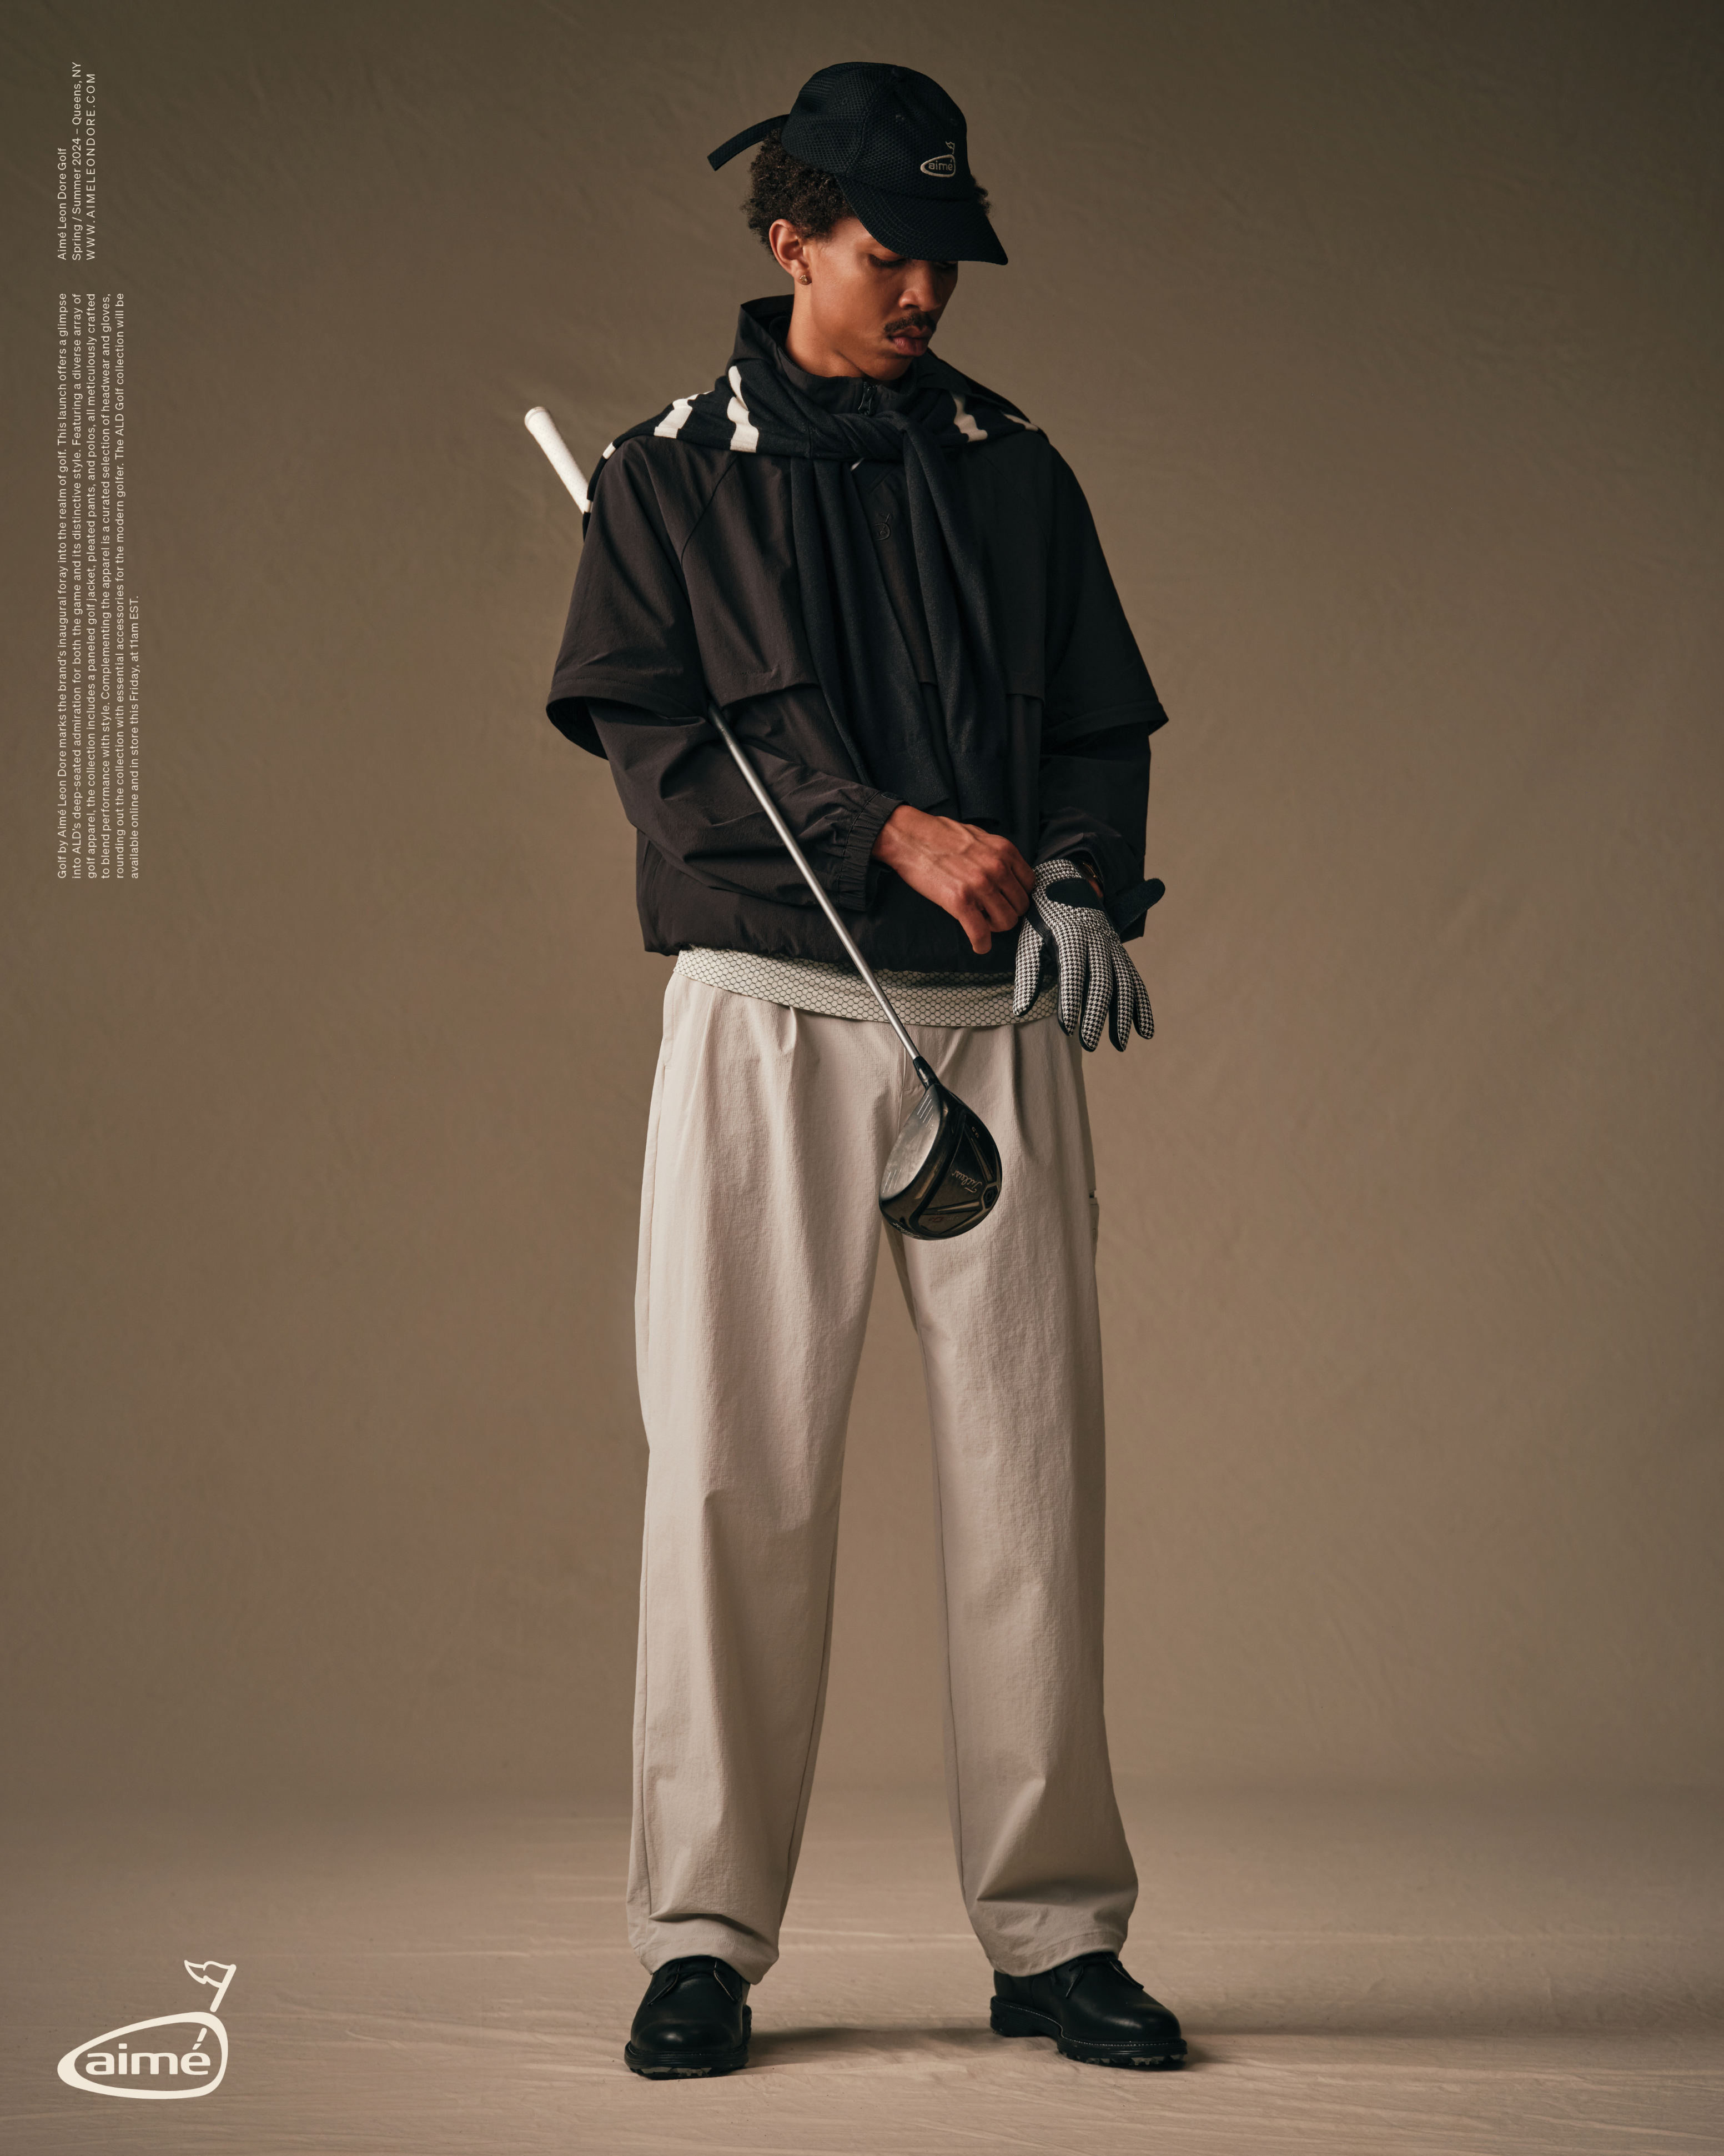 Person in a sporty ensemble with a jacket, cap, and draped neck accessory, holding a golf club, in a neutral-toned photoshoot